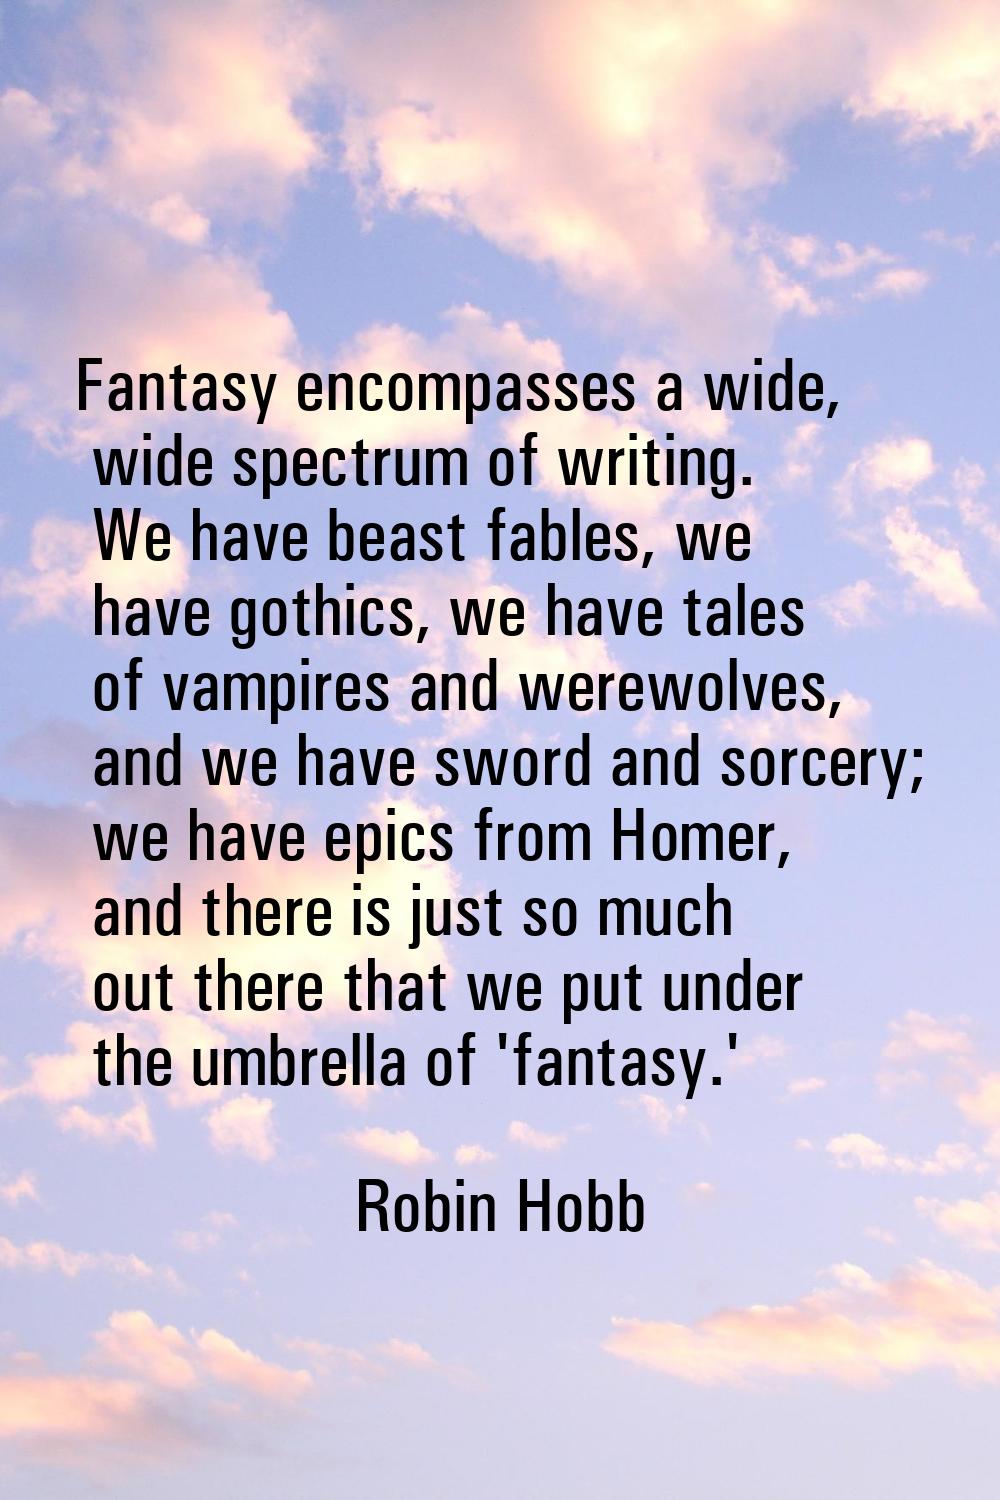 Fantasy encompasses a wide, wide spectrum of writing. We have beast fables, we have gothics, we hav